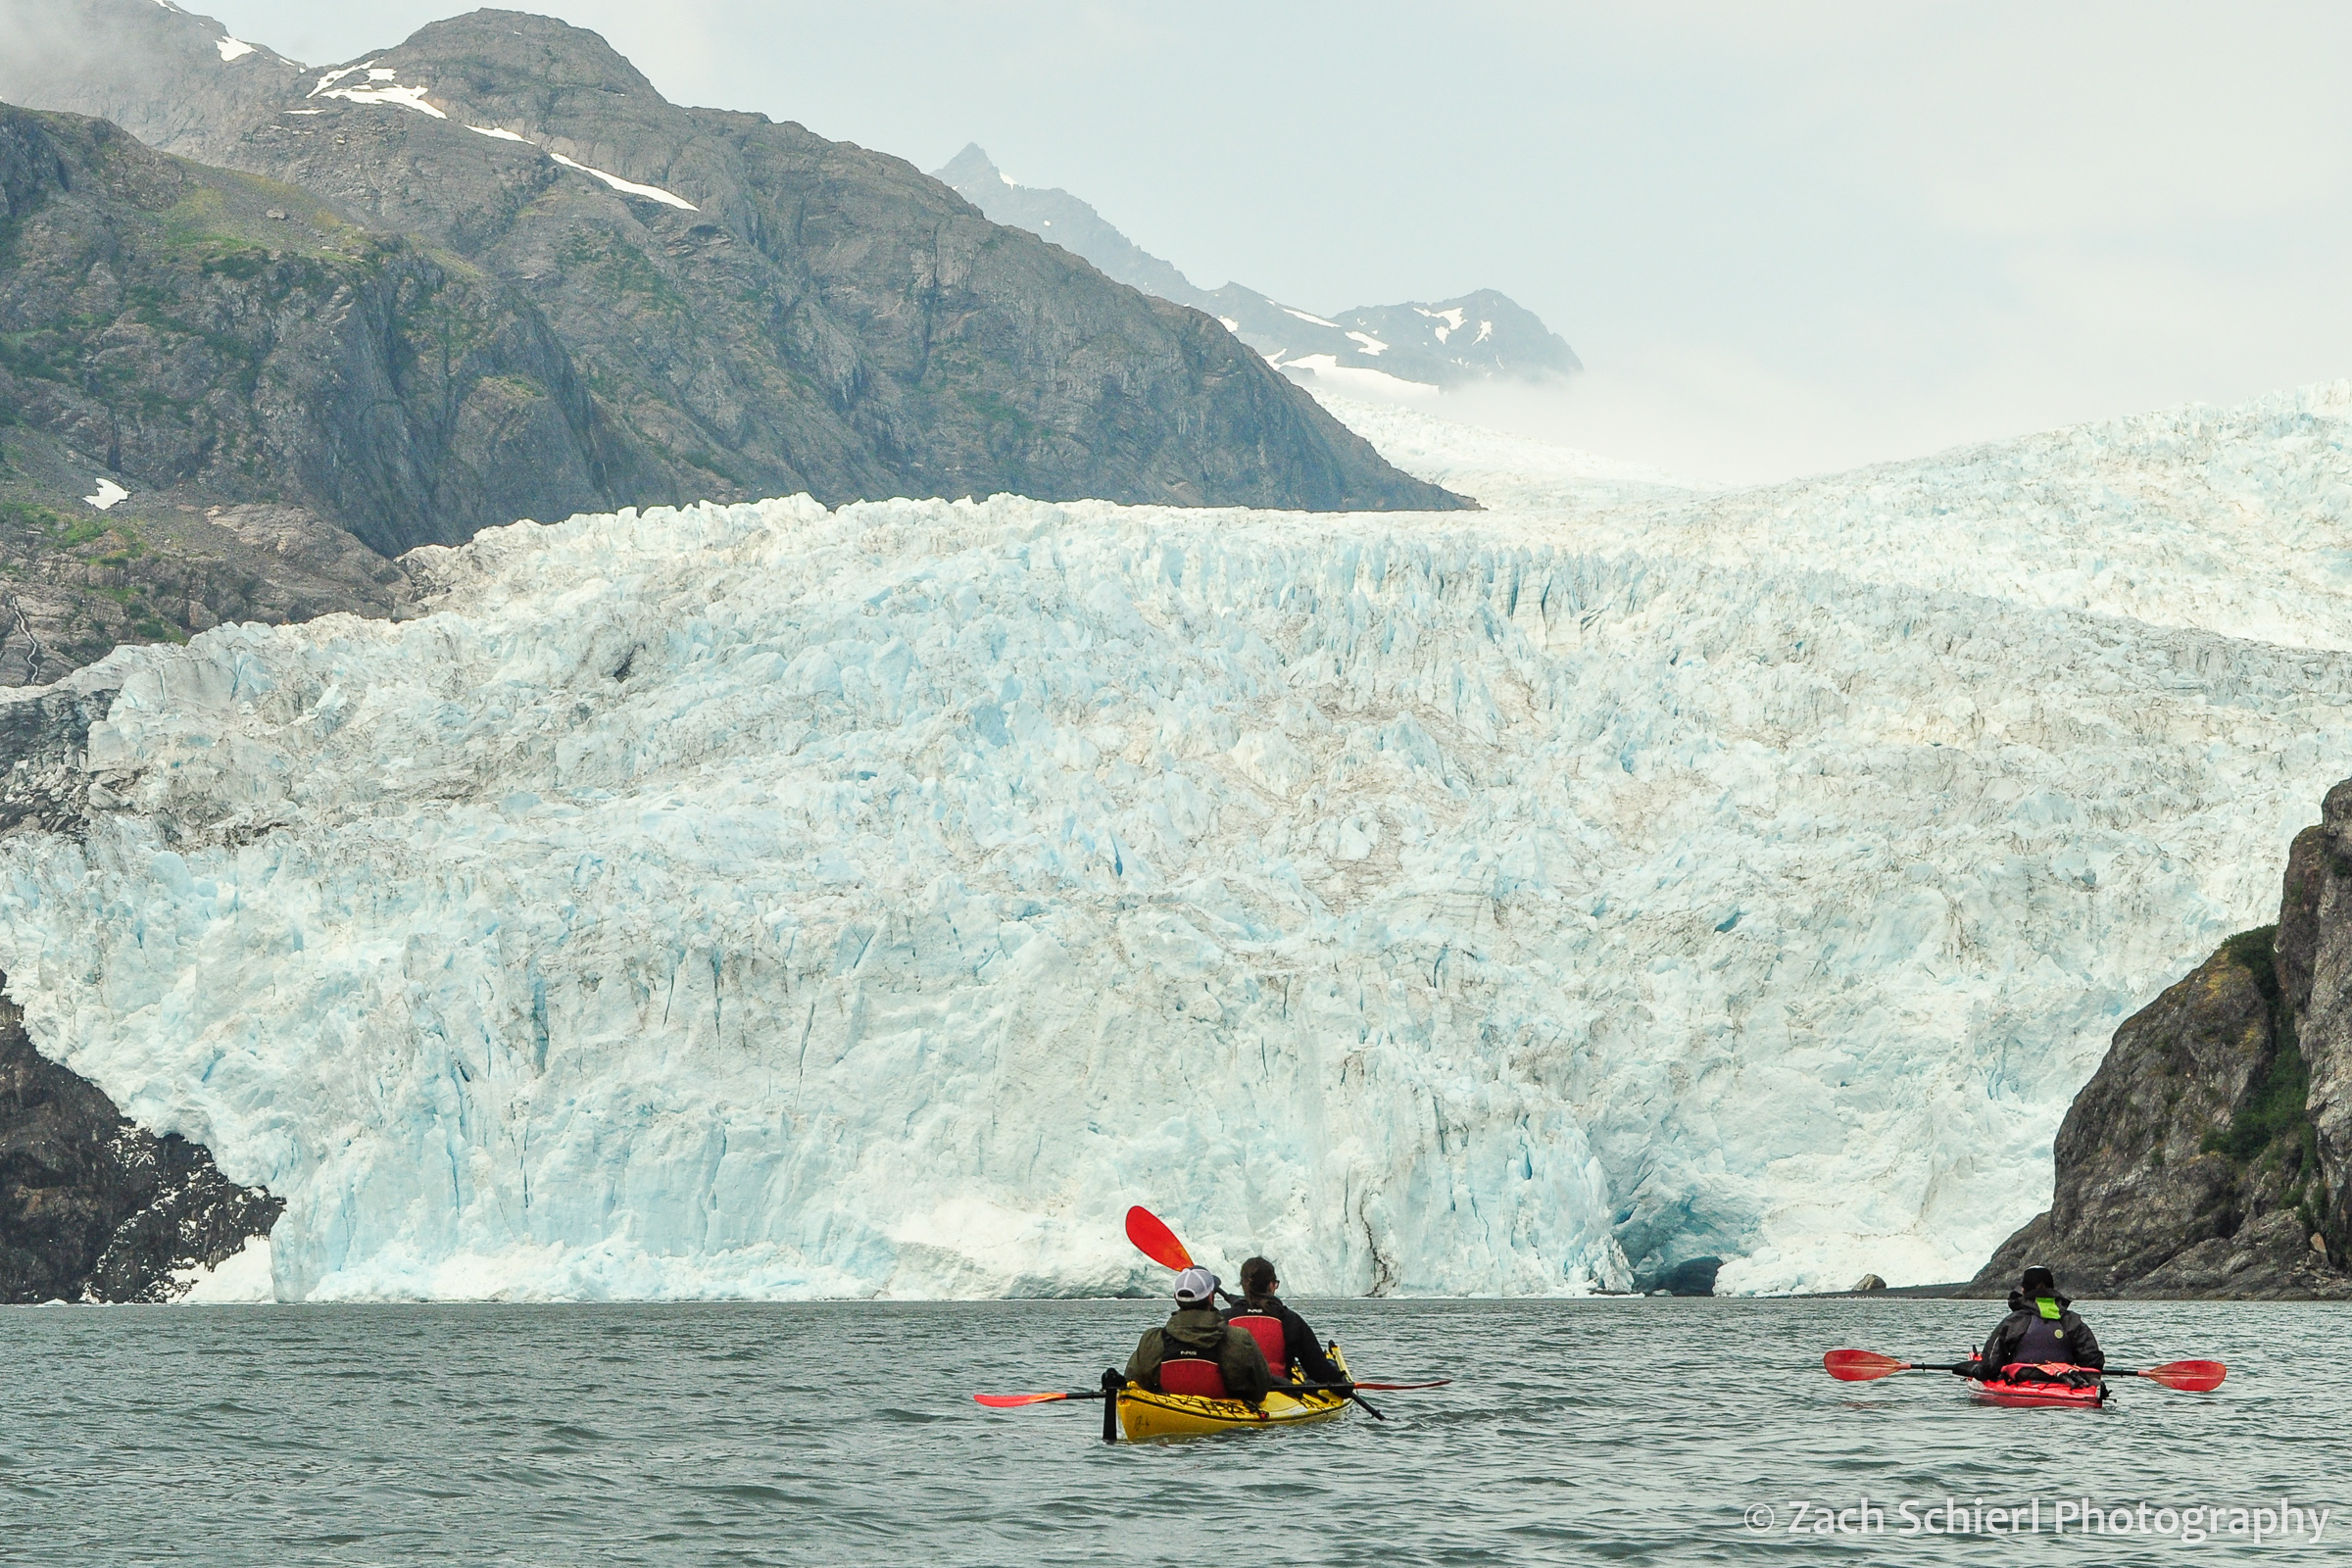 Two kayakers approach a large glacier